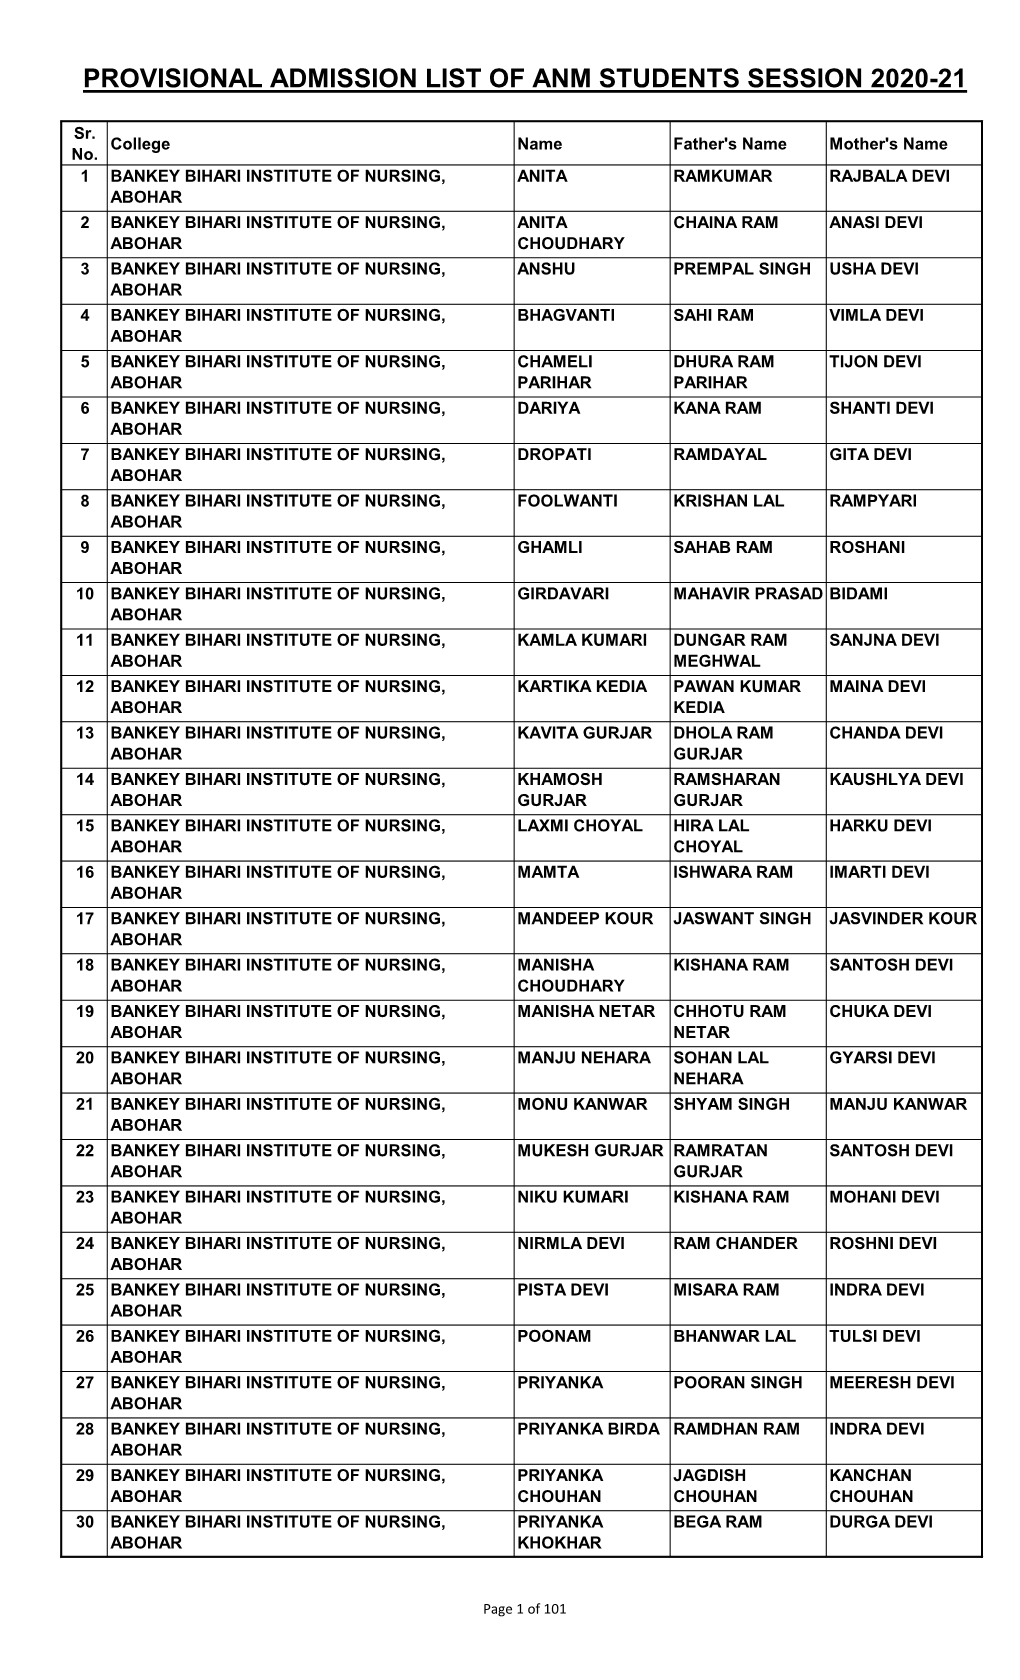 Provisional Admission List of Anm Students Session 2020-21